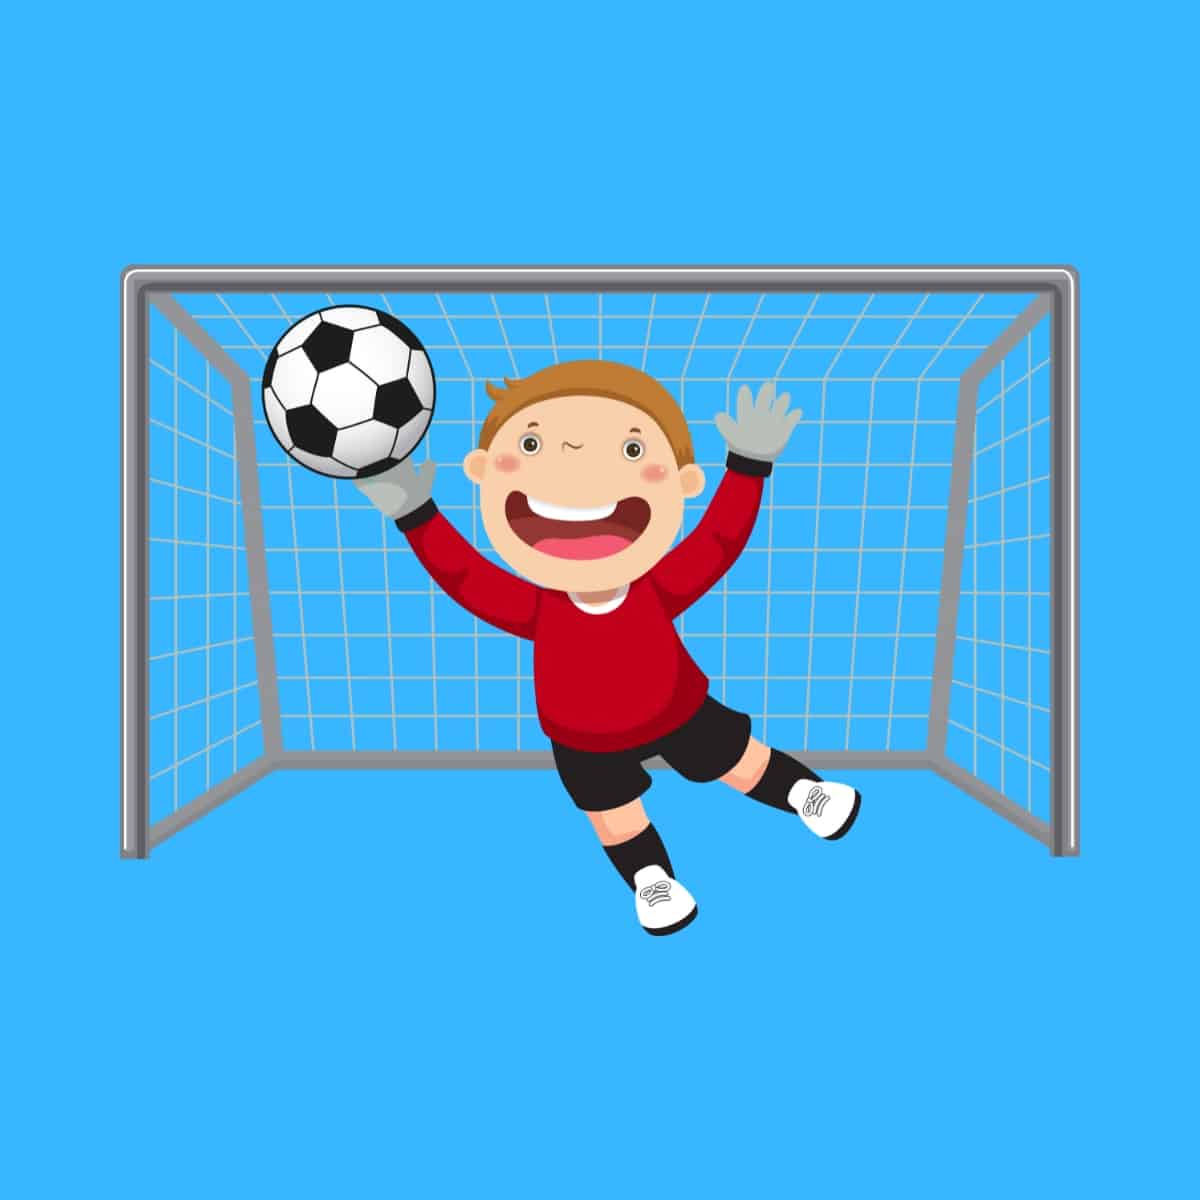 Cartoon graphic of a soccer goalkeeper saving a ball in front of goal on blue background.